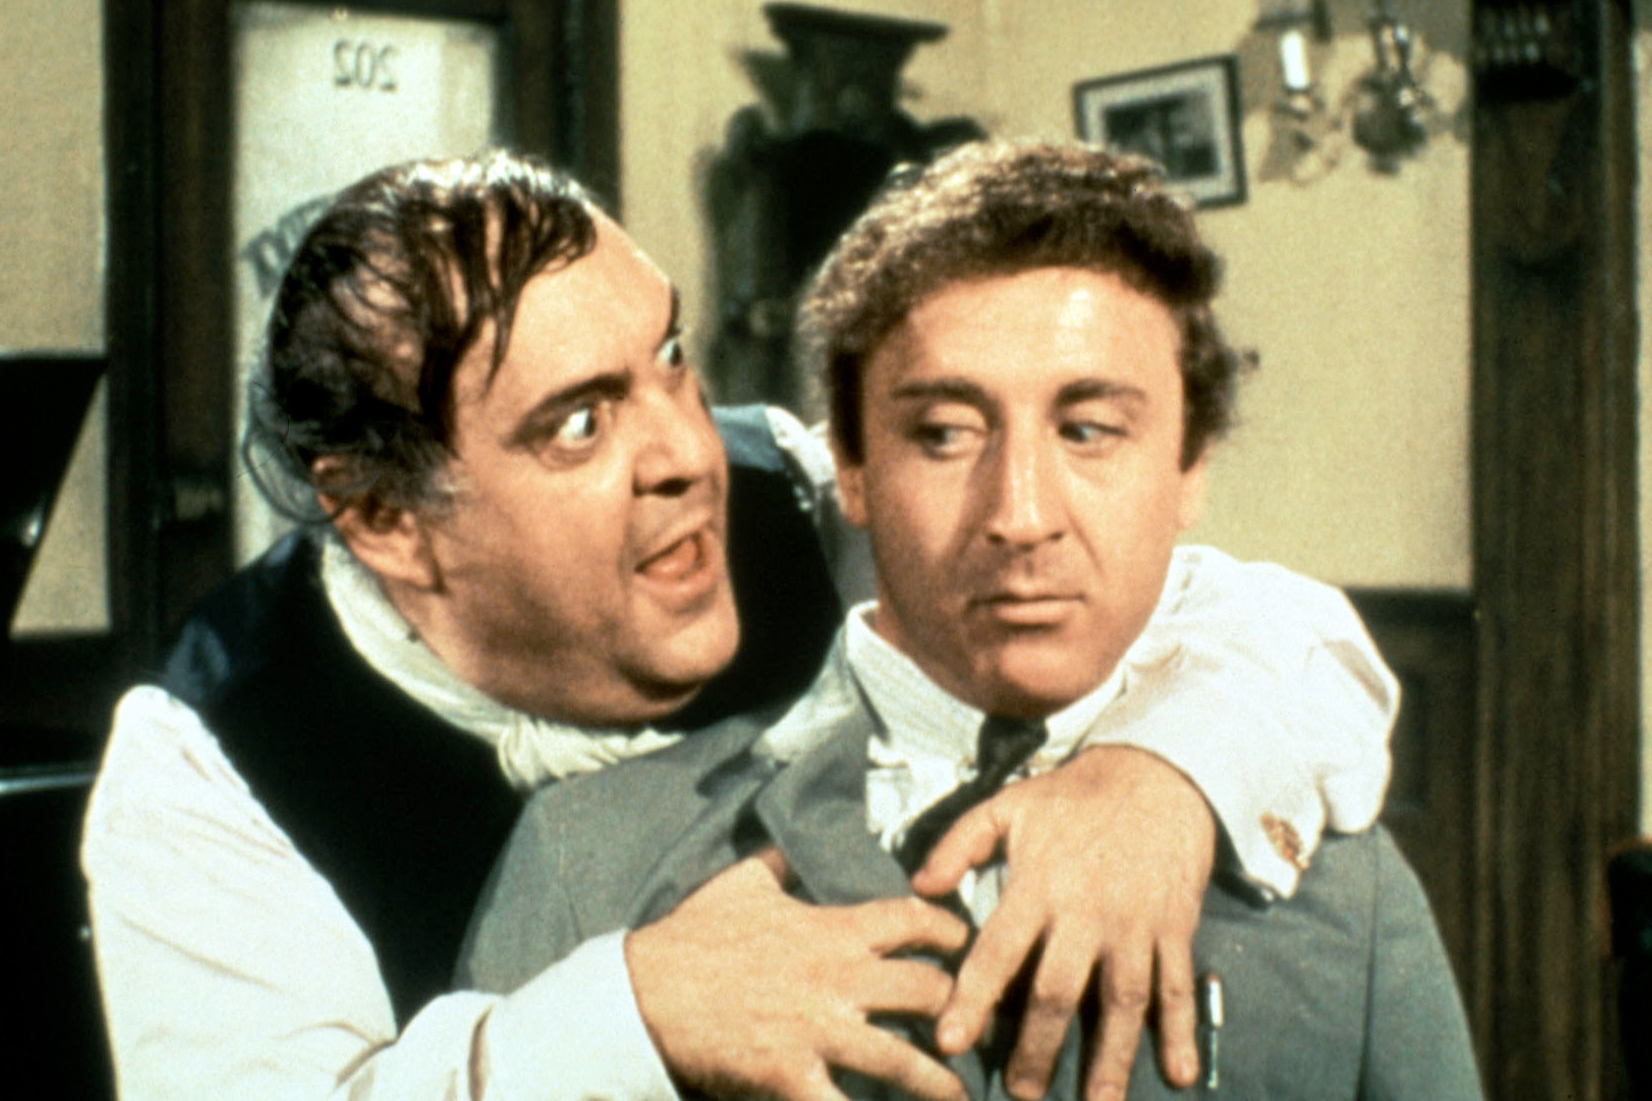 Movie: The Producers, 1968; Play: The Producers, 2001.